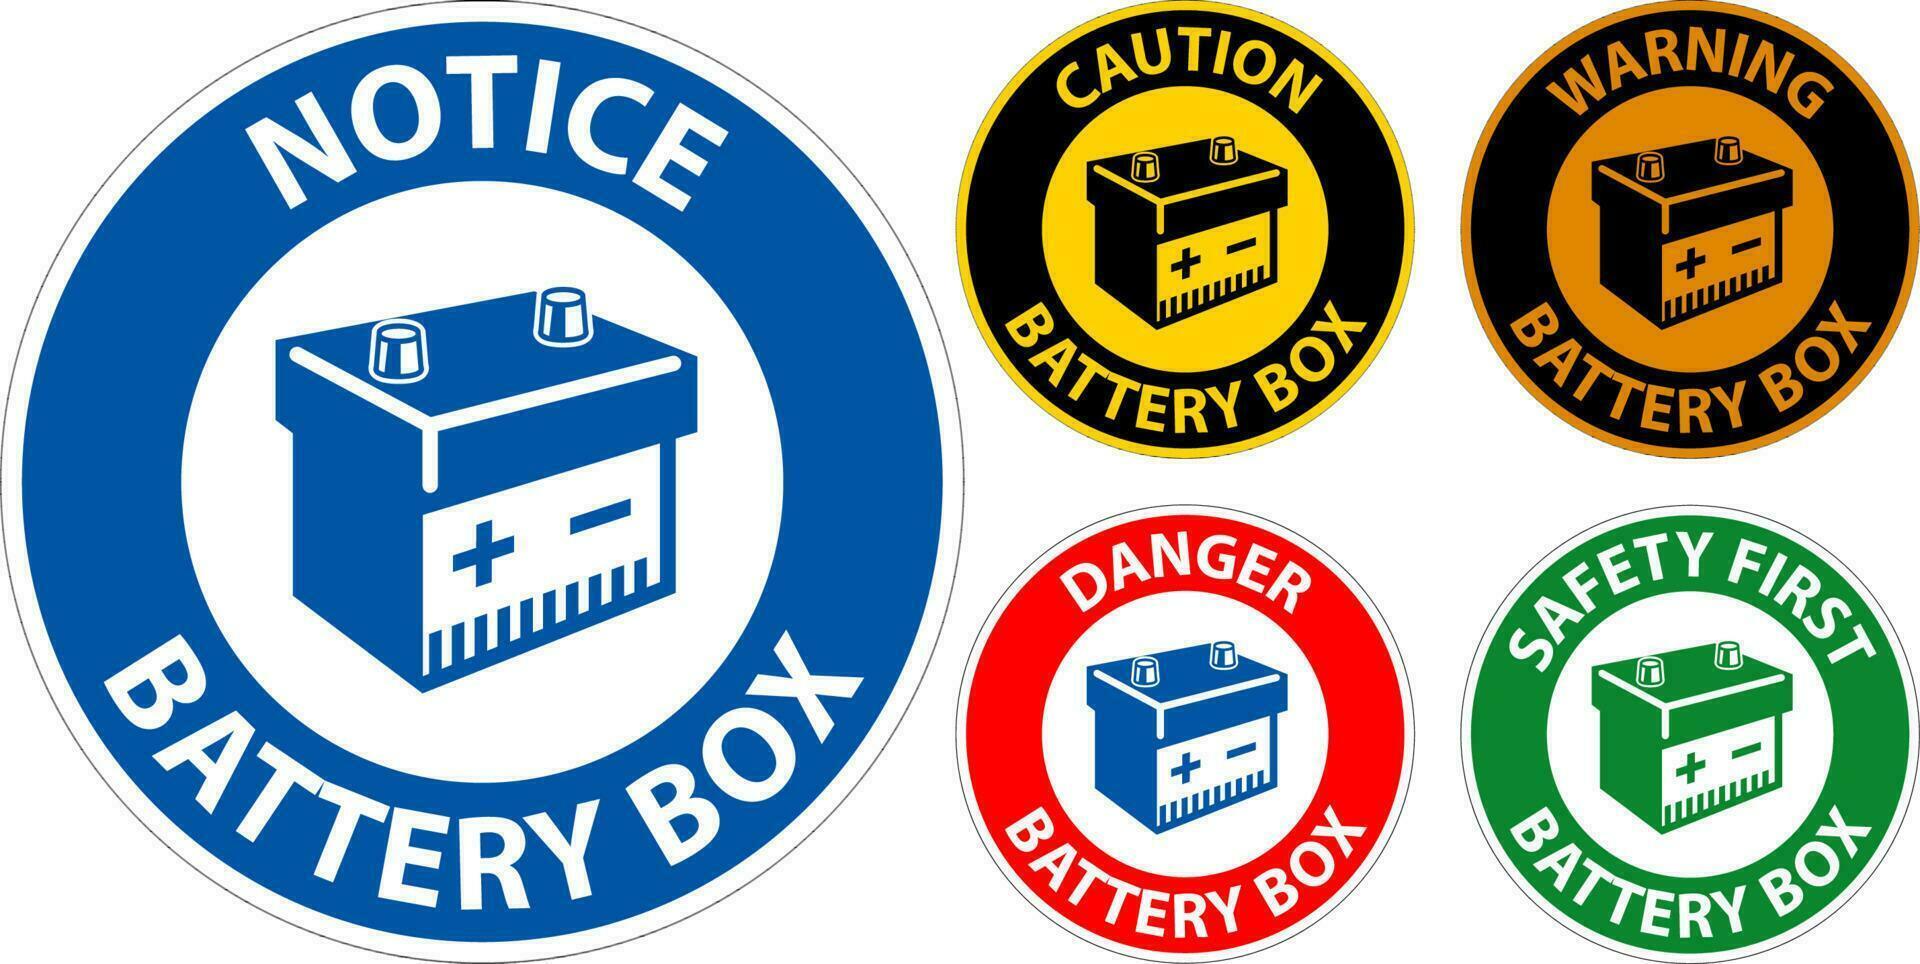 Notice Battery Box with Icon Sign On White Background vector